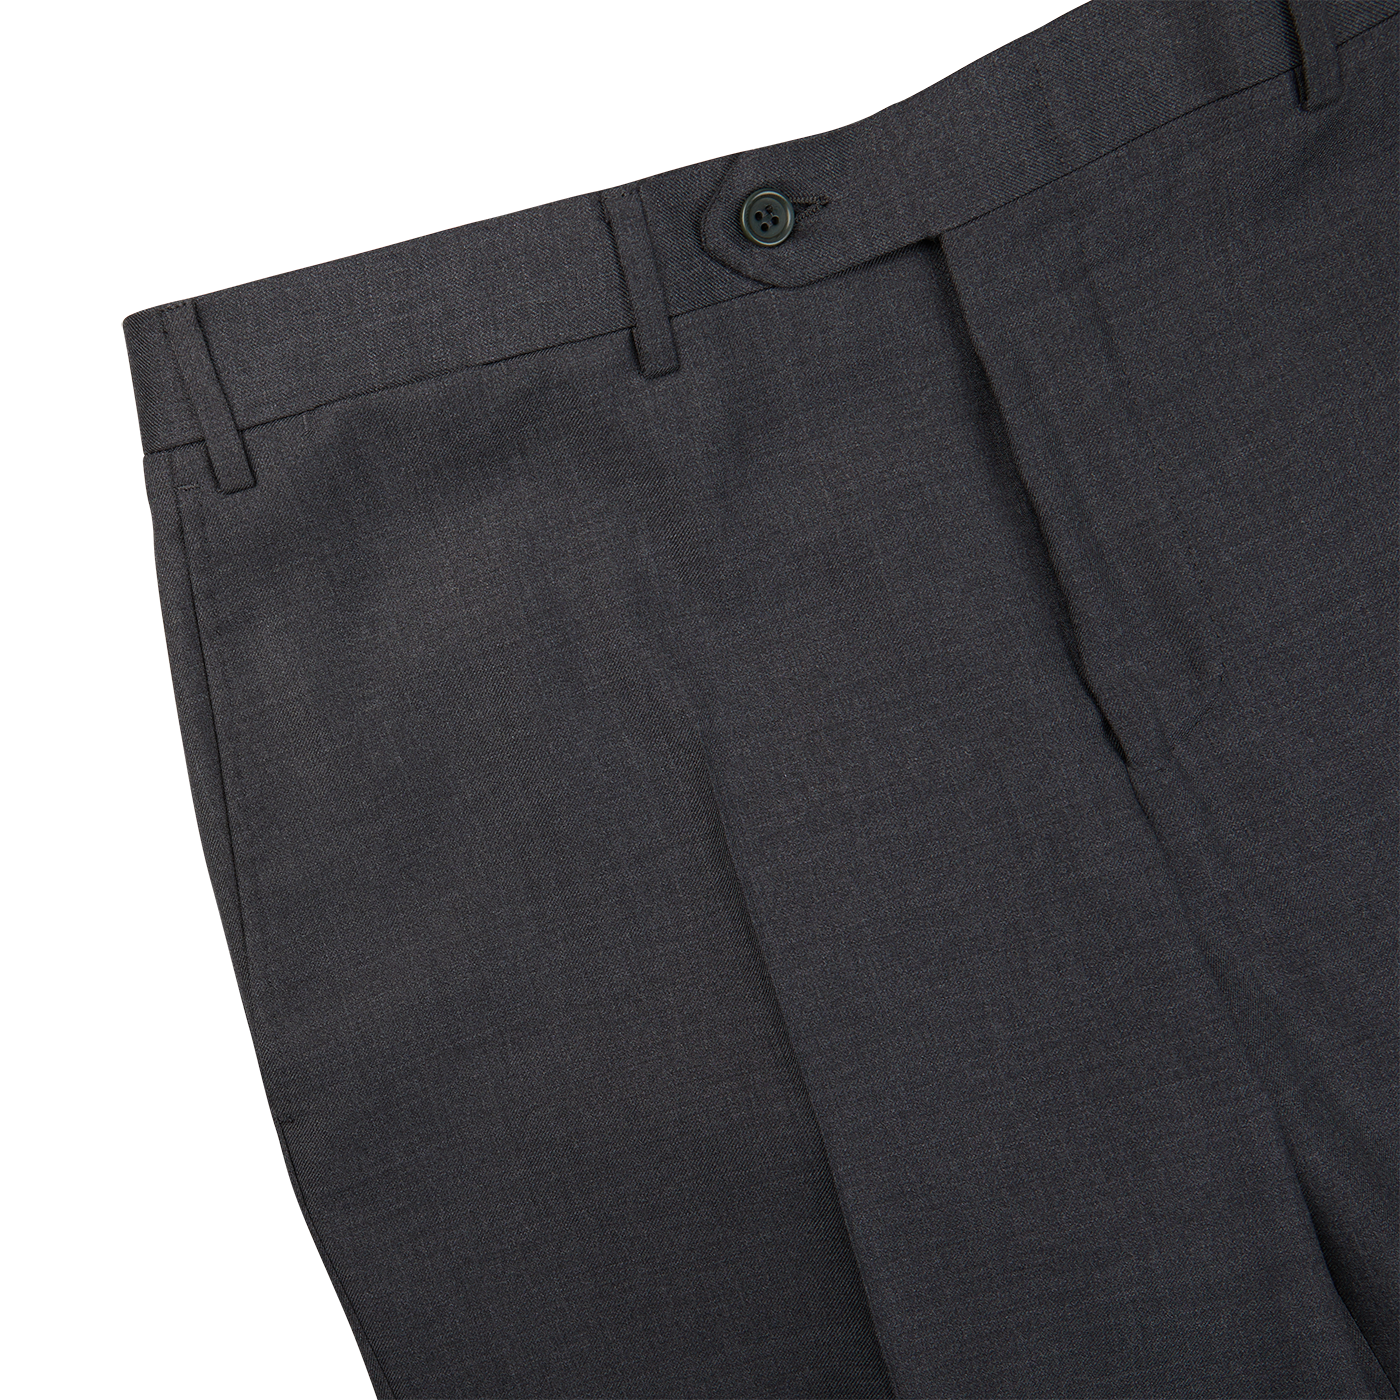 A close up image of a Canali Charcoal Grey Wool Notch Lapel Suit pant, formal and timeless in style.